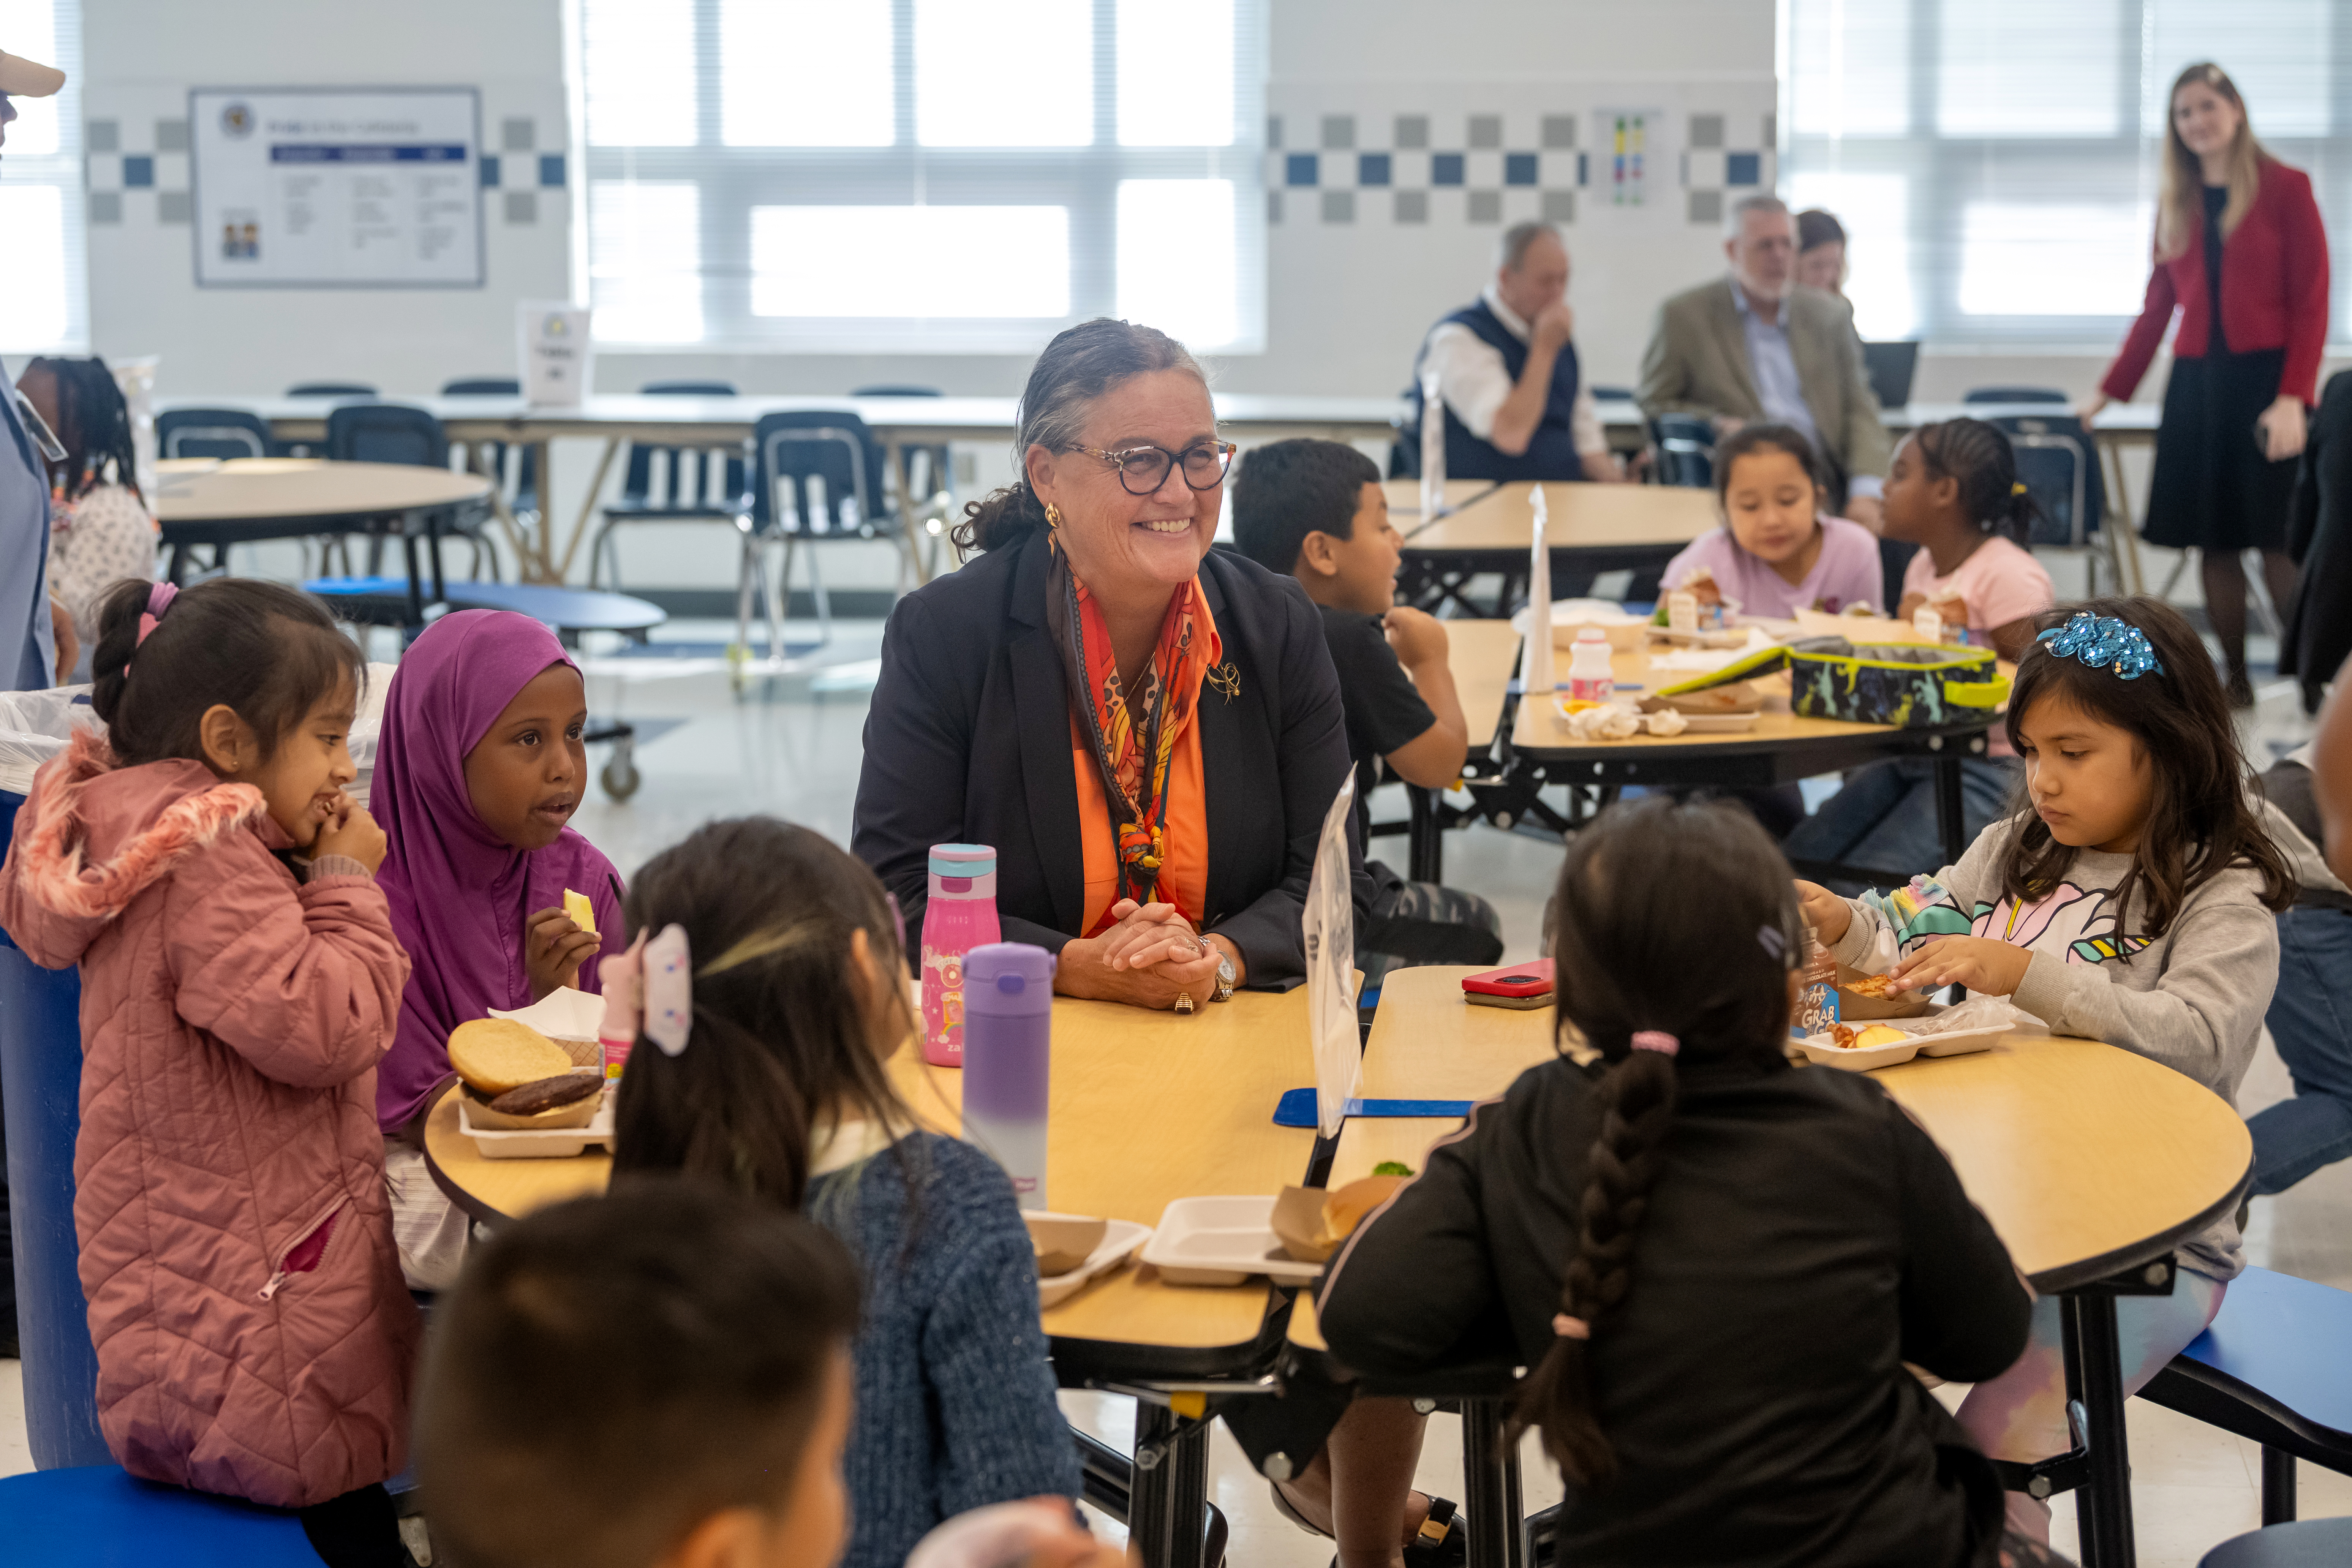 Superintendent Dr. Michelle Reid joins an Annandale Terrace Elementary School student at the cafeteria table.